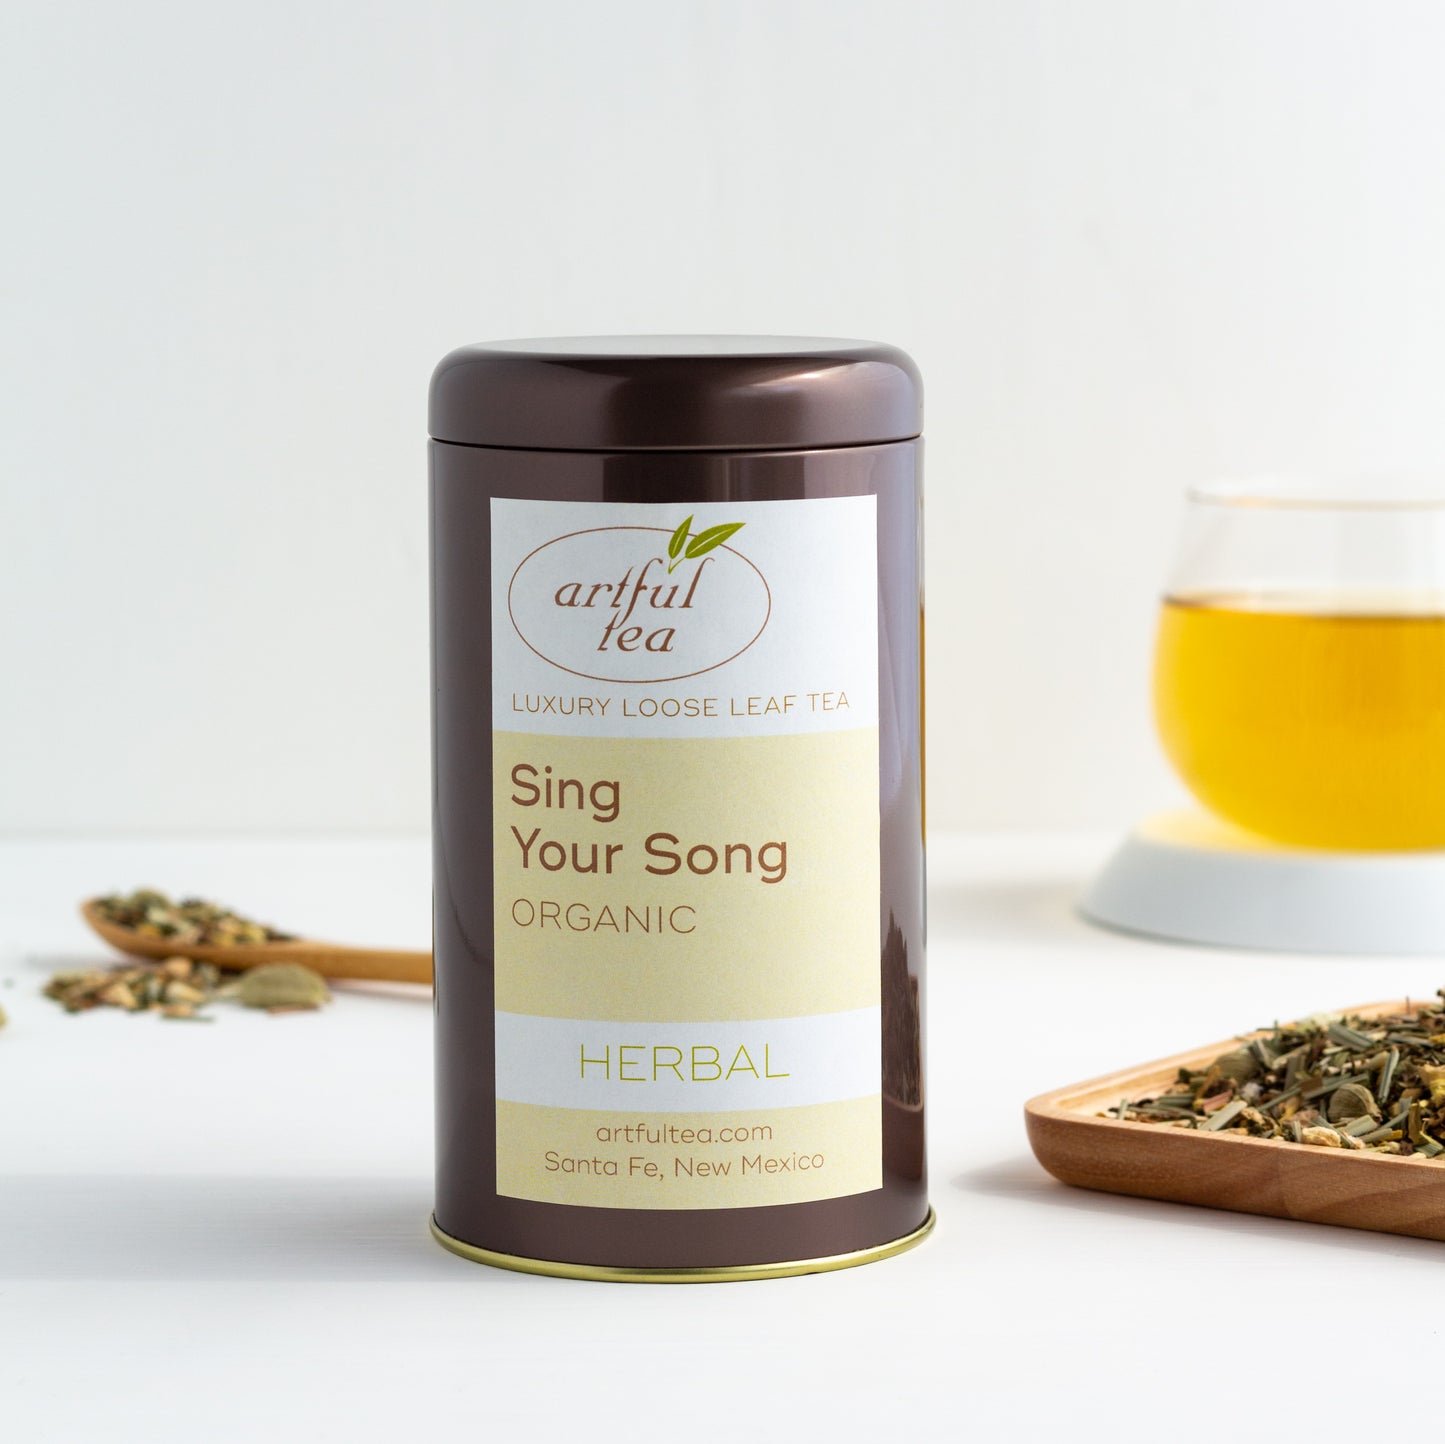 Organic Sing Your Song Herbal Tea shown packaged in a brown tin with a wooden dish of tea leaves nearby and a glass of brewed tea in the background.